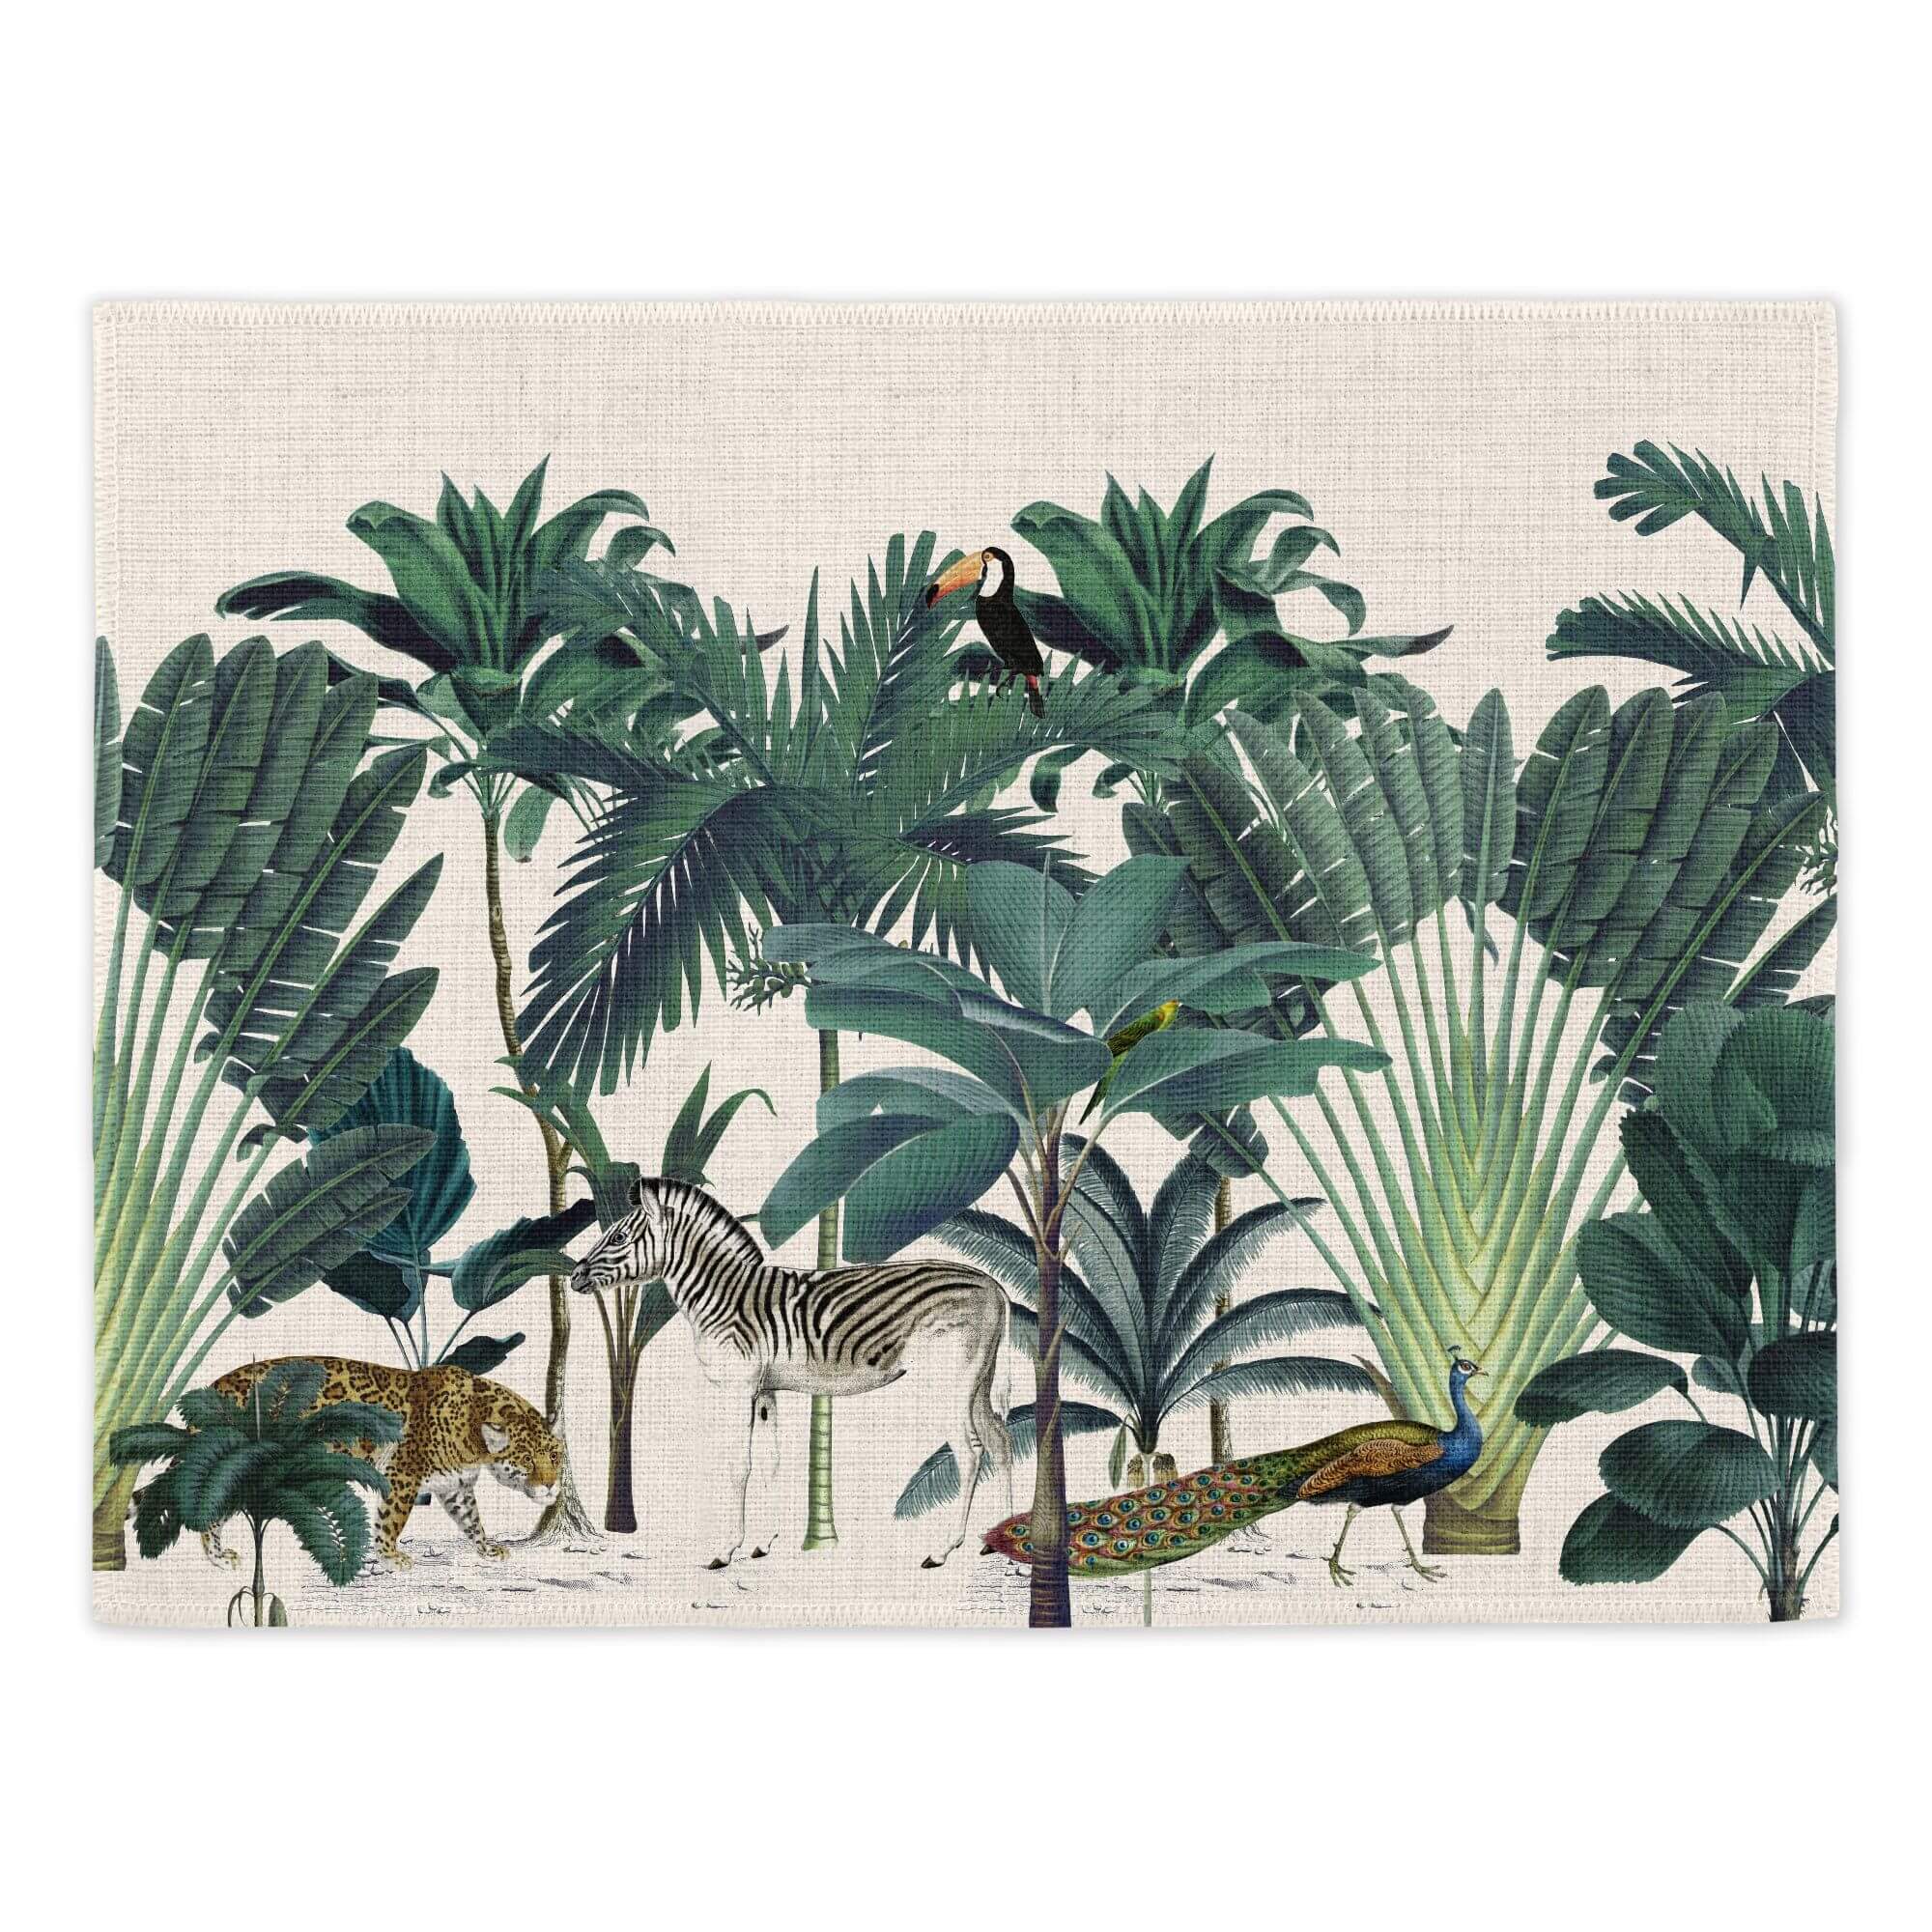 Darwin's Menagerie Placemats (Set of Four) Placemats Mustard and Gray Ltd Shropshire UK